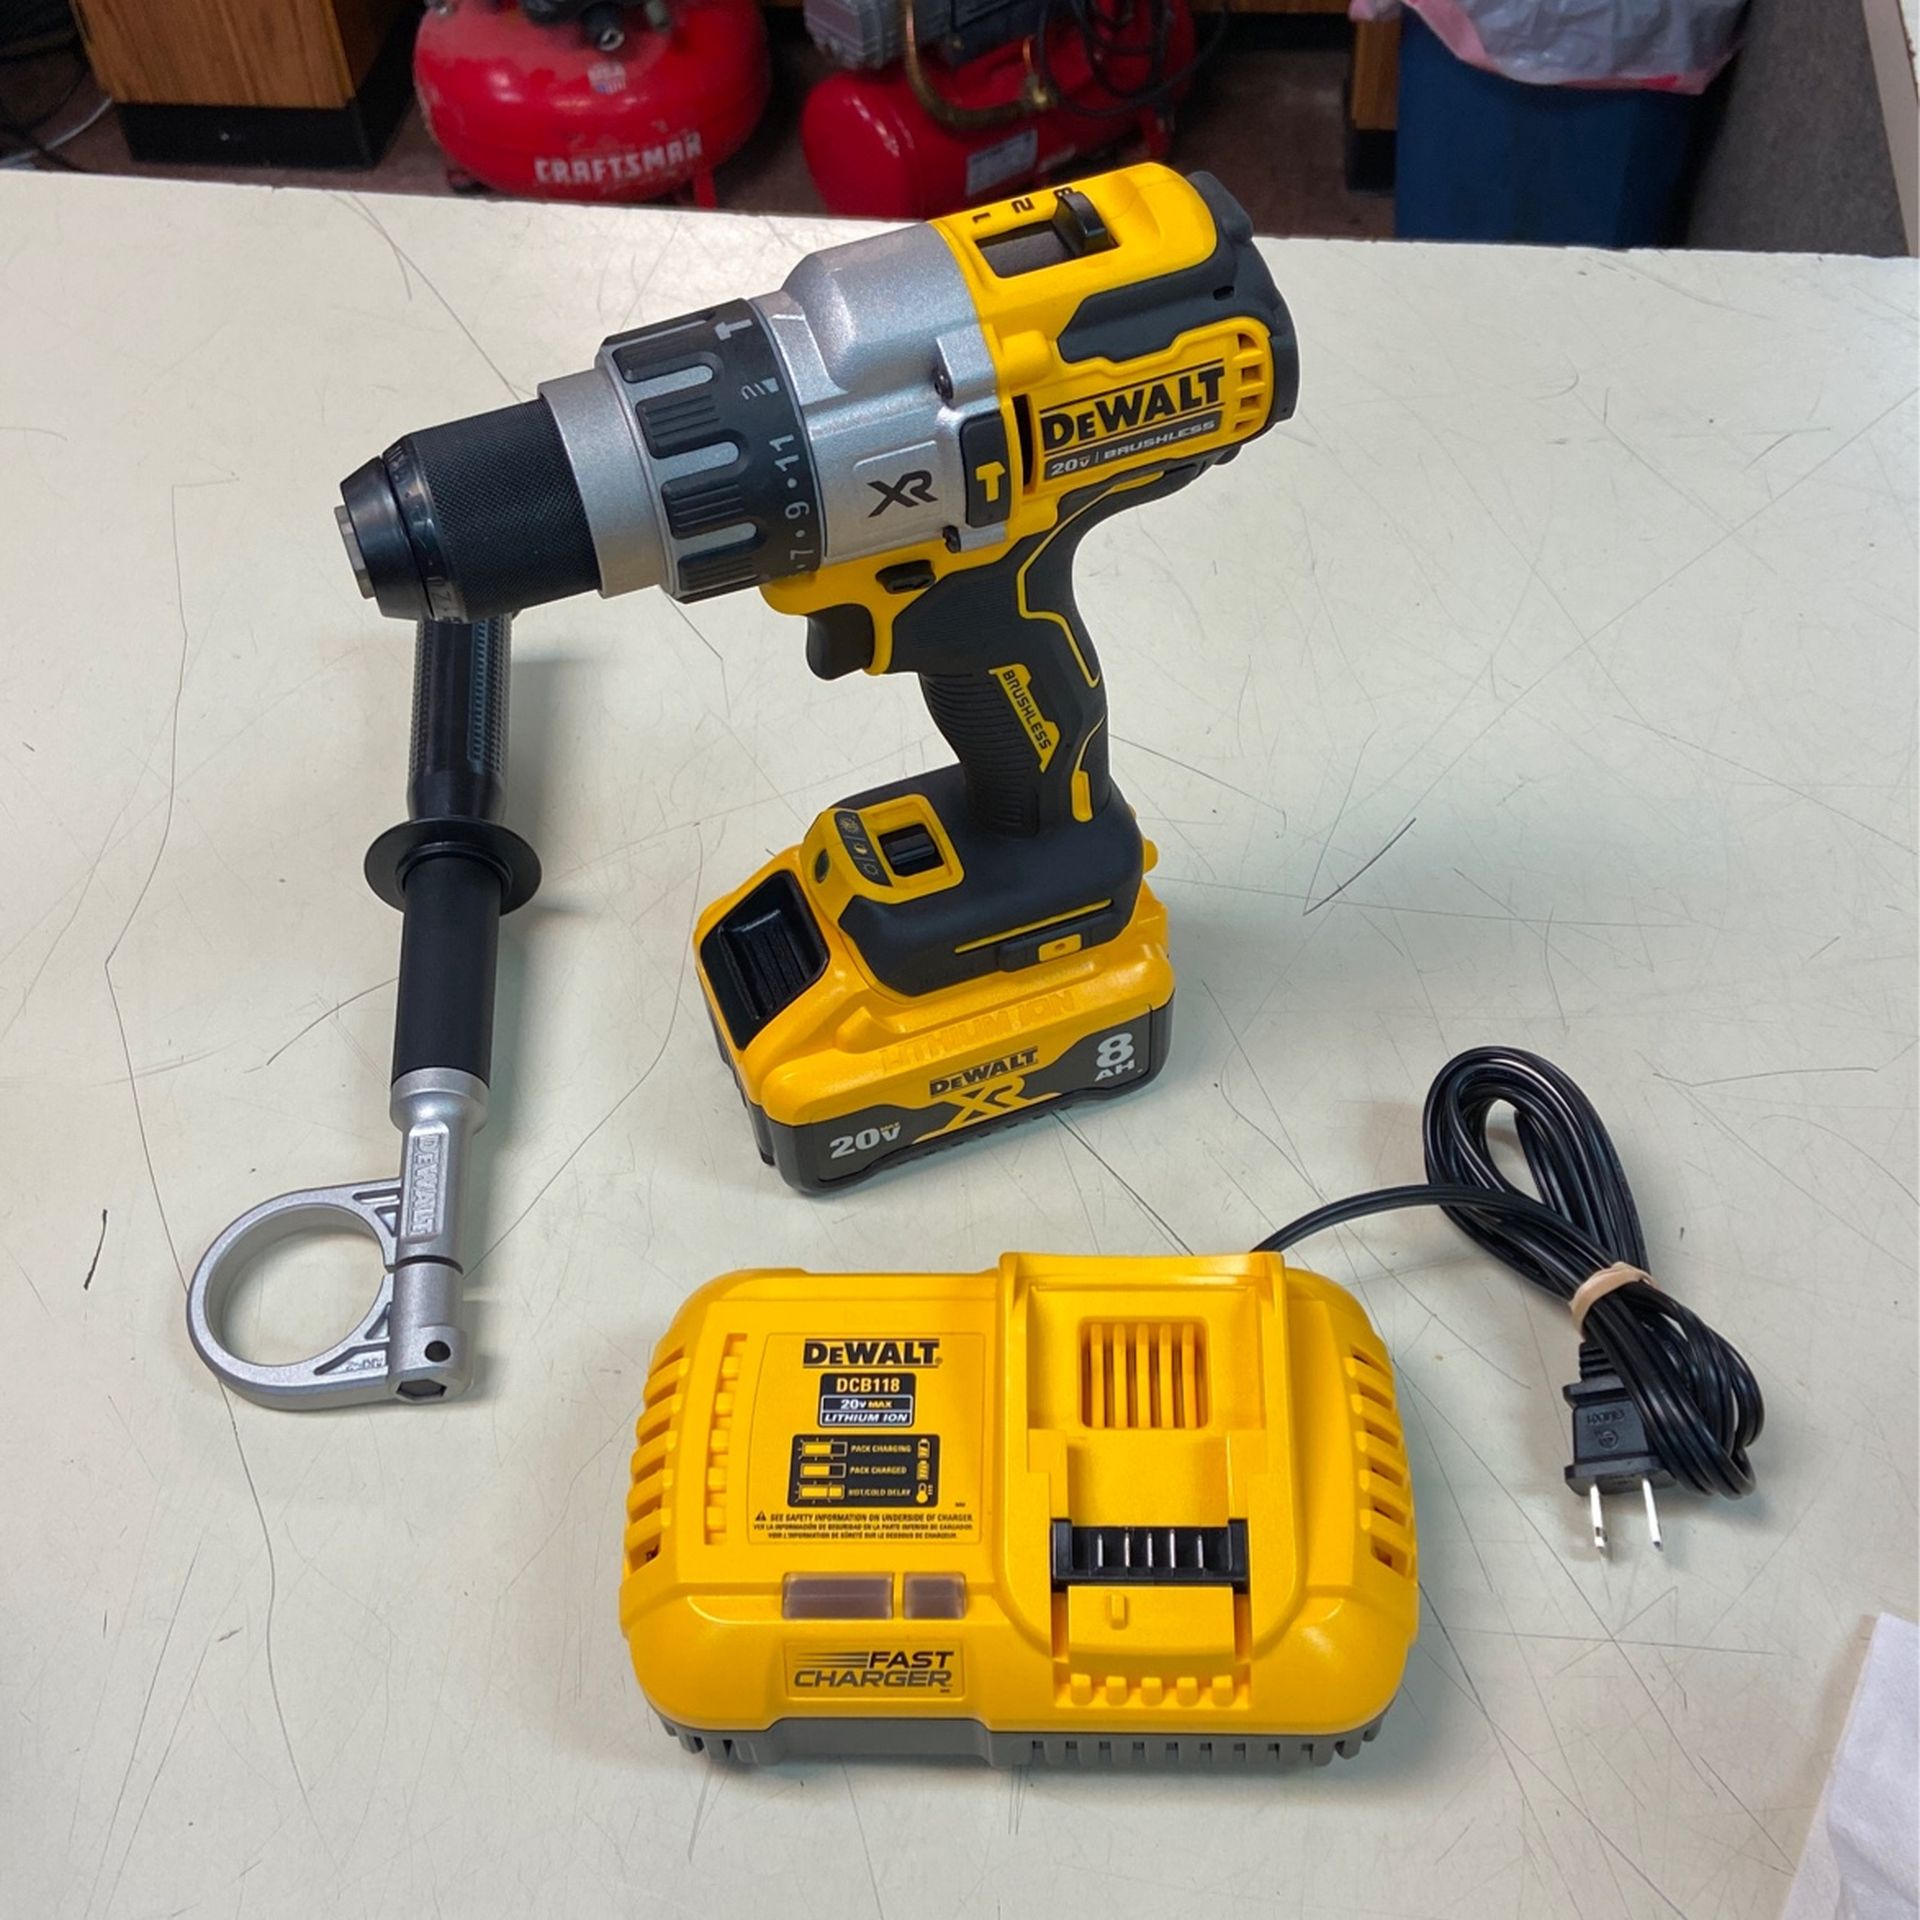 Brand New . Dewalt 1/2” HAMMERDRILL with 20V 8AH Battery and Fast Charger